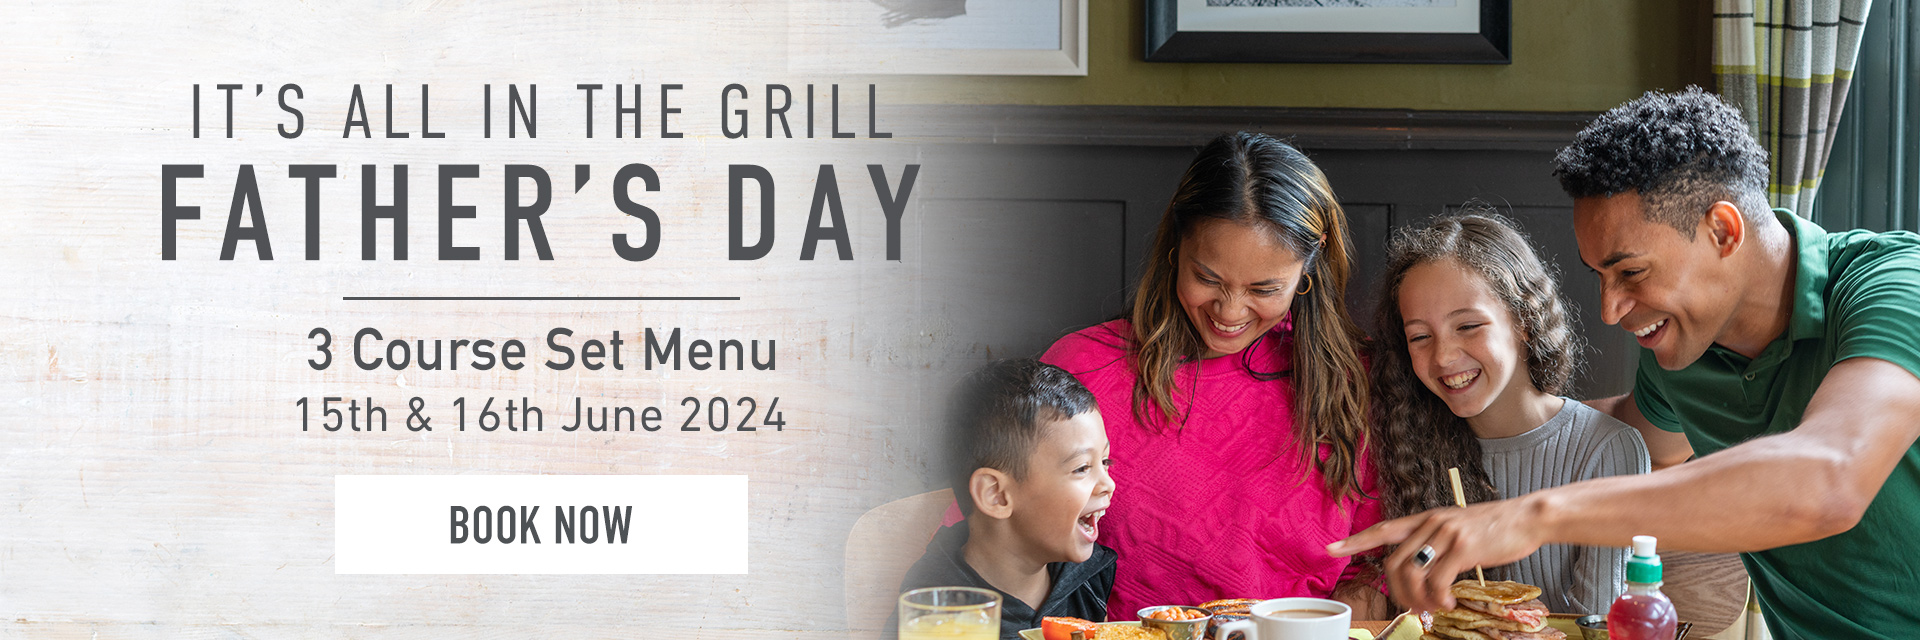 Father’s Day at The Horse & Groom